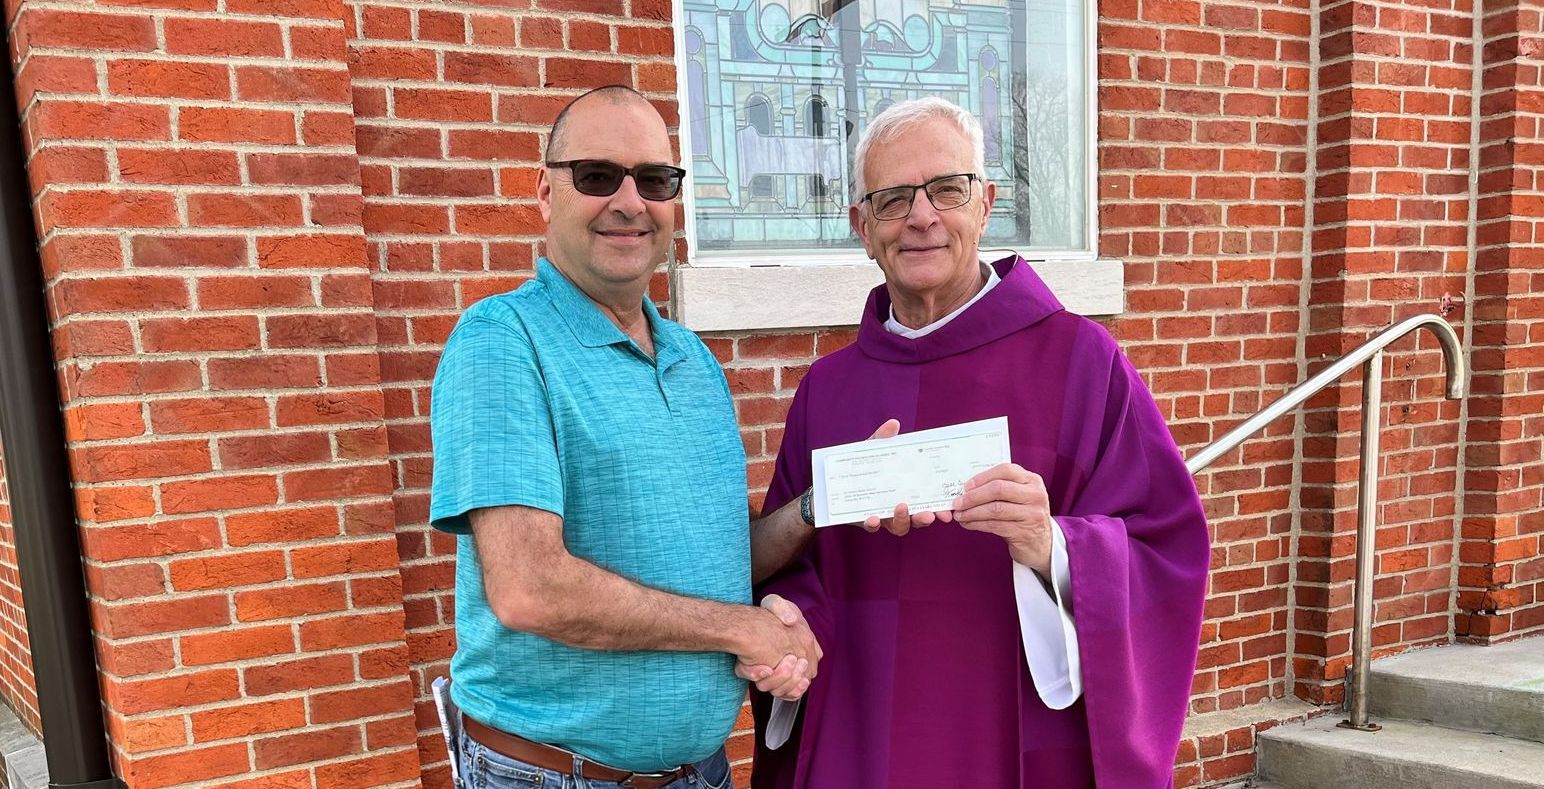 Holy Angels Catholic Church Renovation Project Receives 30 Year of